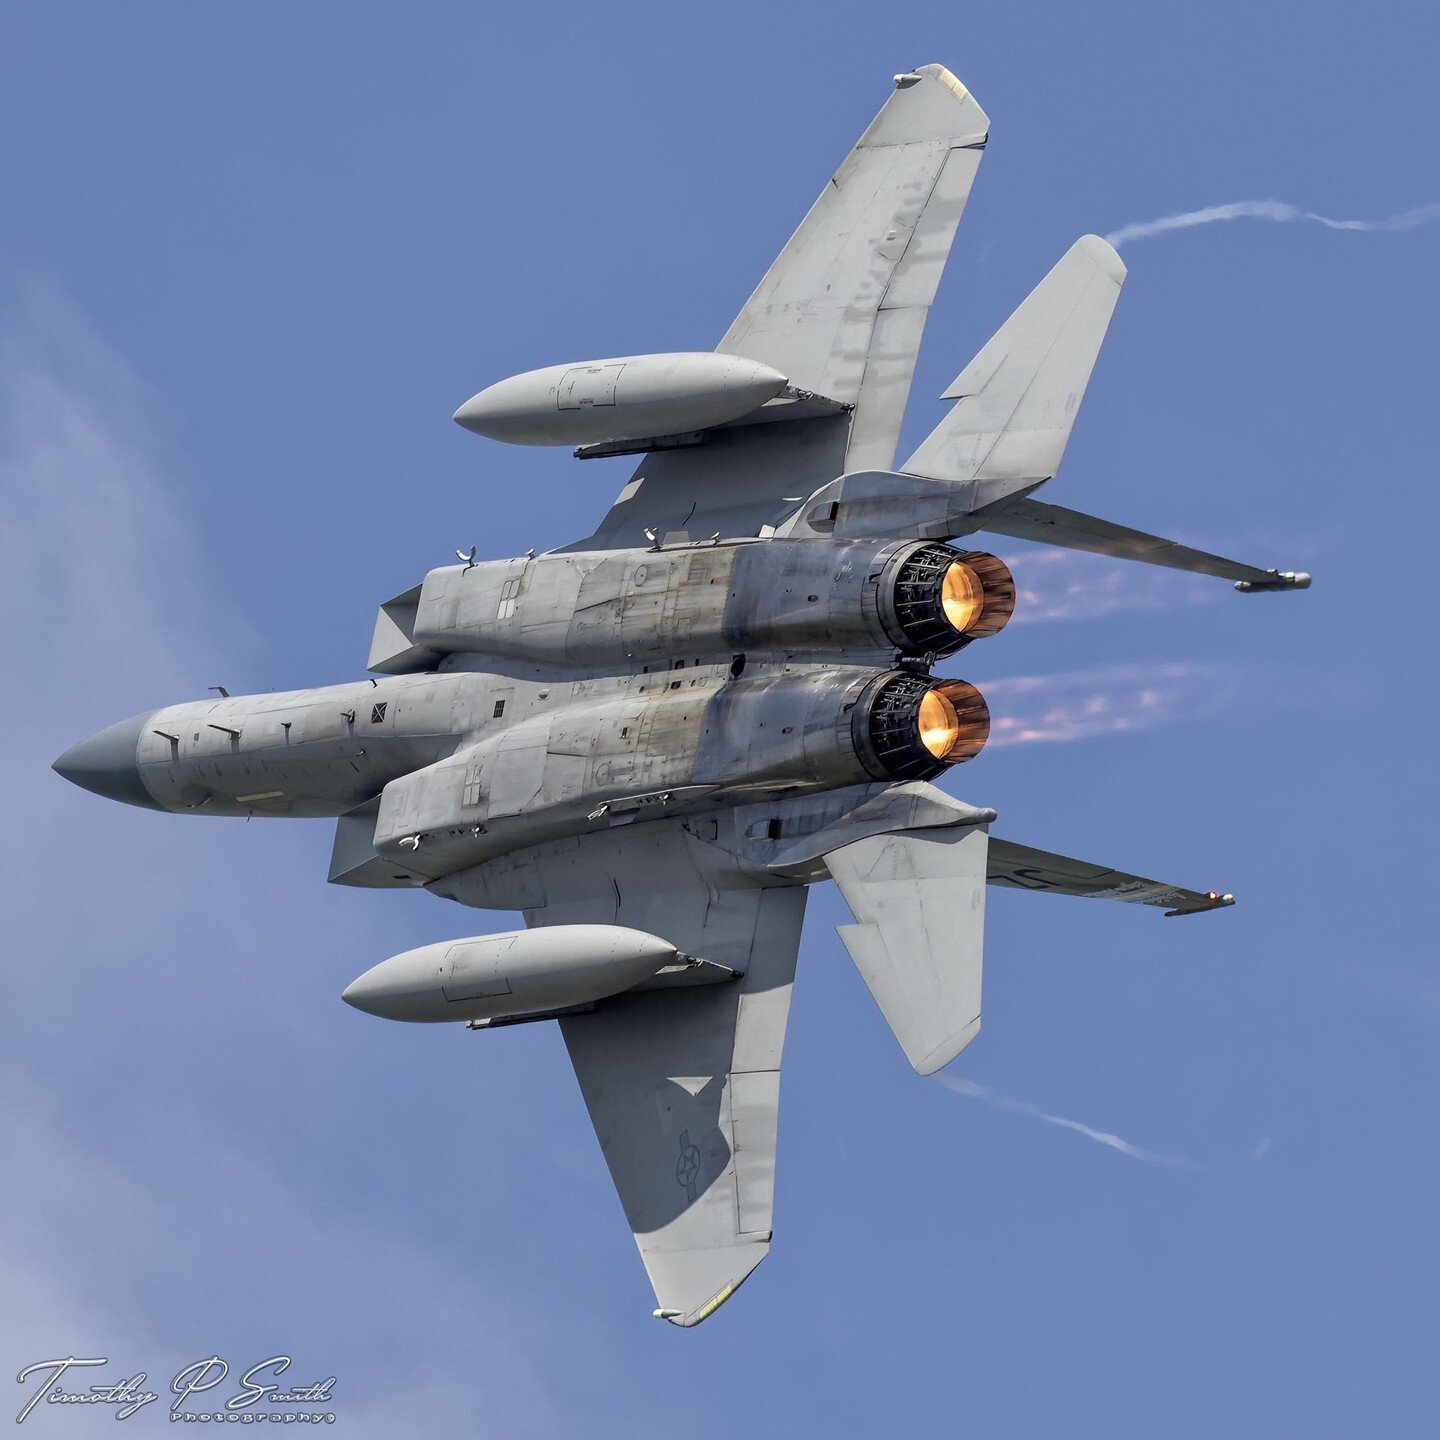 The Louisiana Air National Guard 159 FW / 122 FS Bayou Militia at the New Orleans Airshow 2024!&nbsp; The McDonnell Douglas F-15C Eagle 83-0036 Afterburners lit for the Sounds of Freedom.

#louisianaairnationalguard&nbsp; #159fw #BayouMilitia
#F15C&n